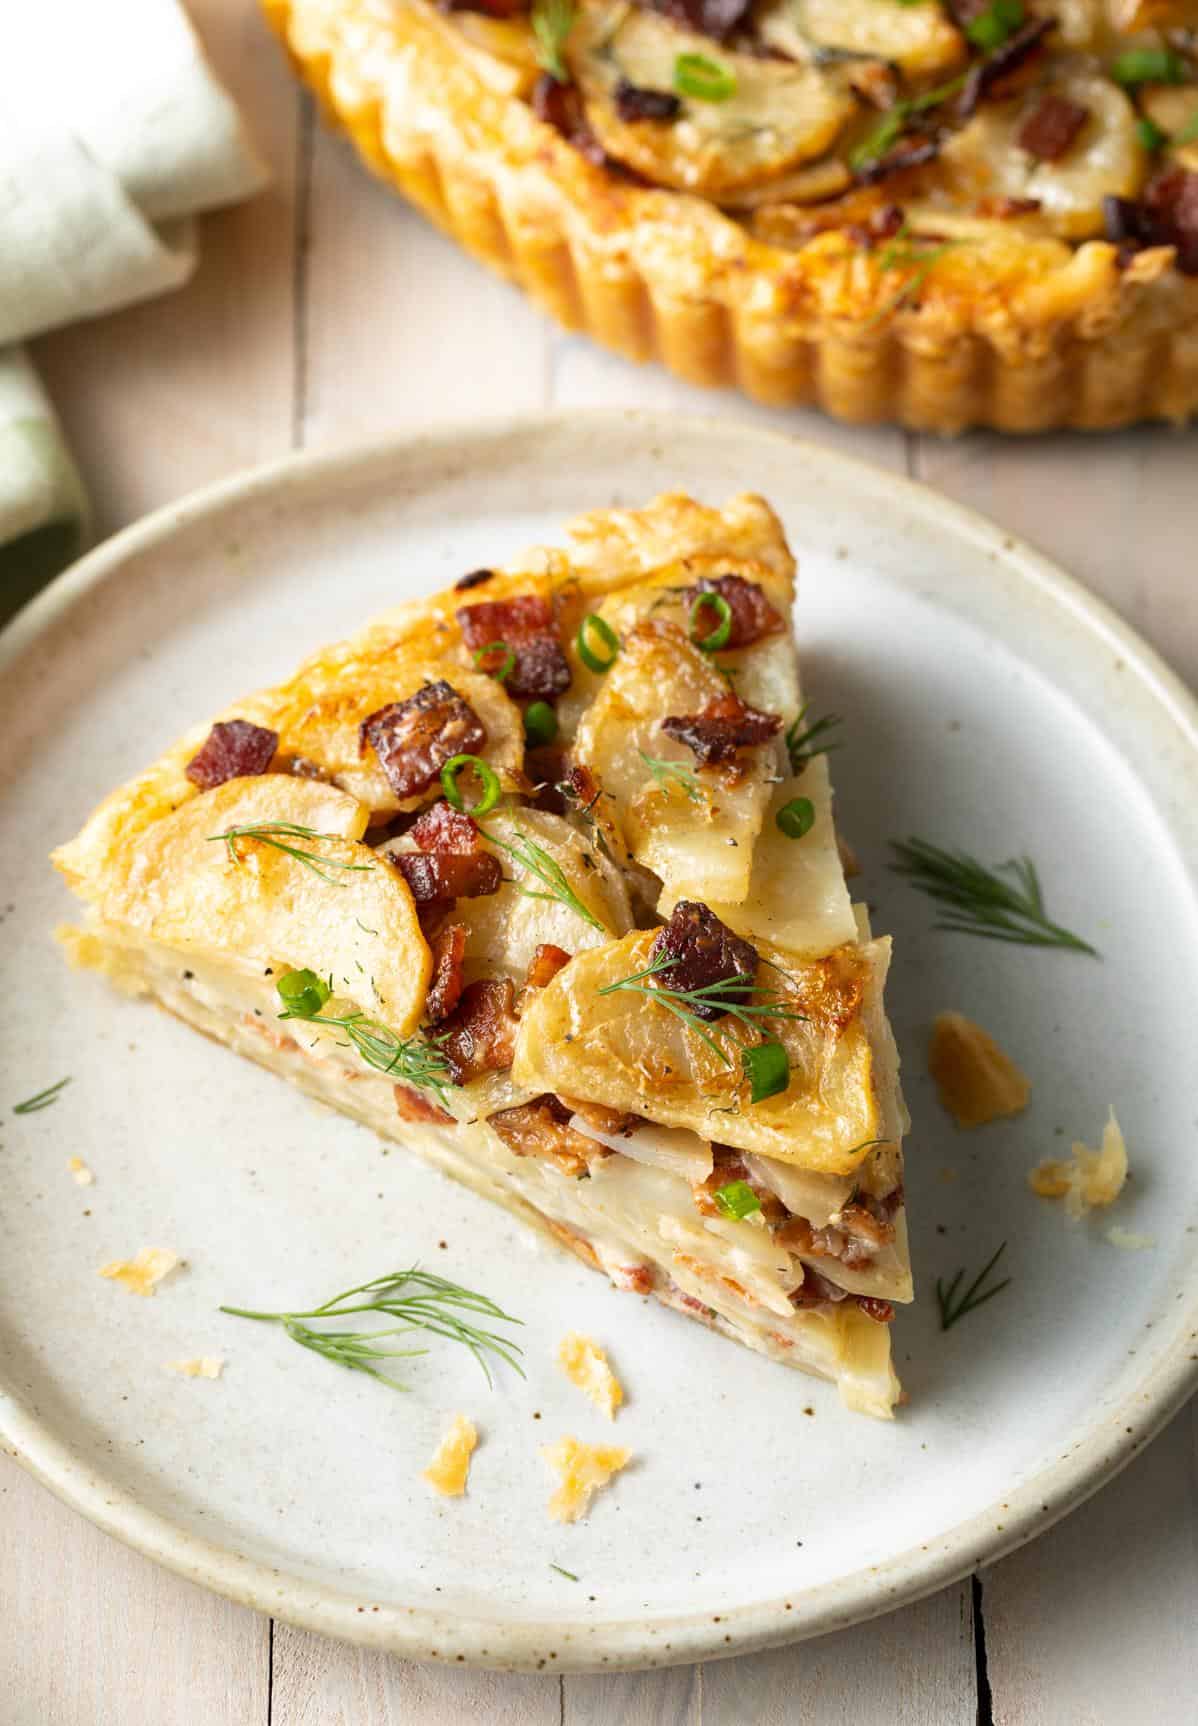  A slice of this scrumptious pie is all you need for a hearty meal.